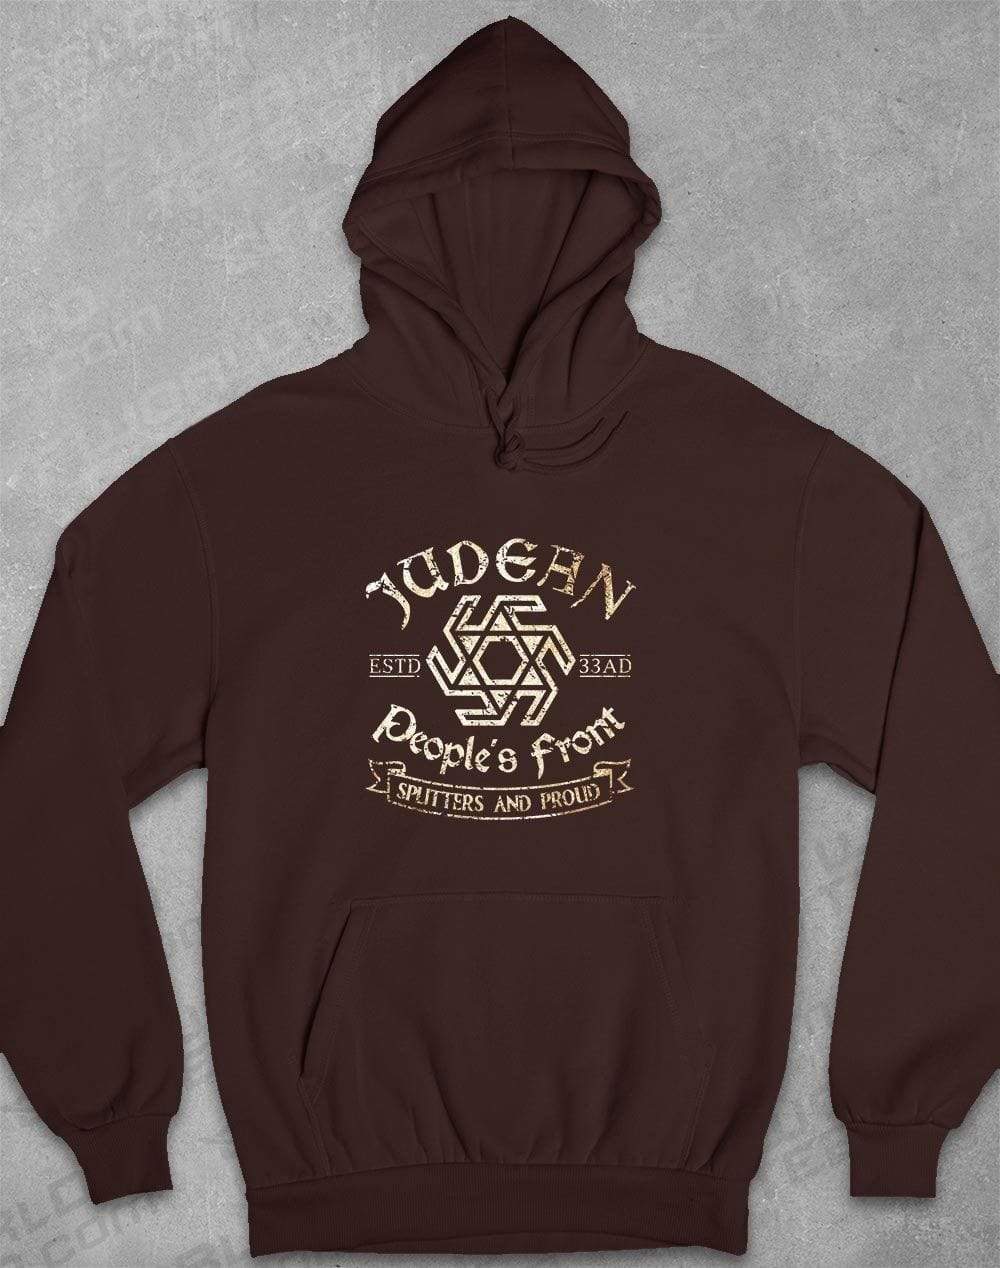 Judean People's Front Hoodie S / Hot Chocolate  - Off World Tees